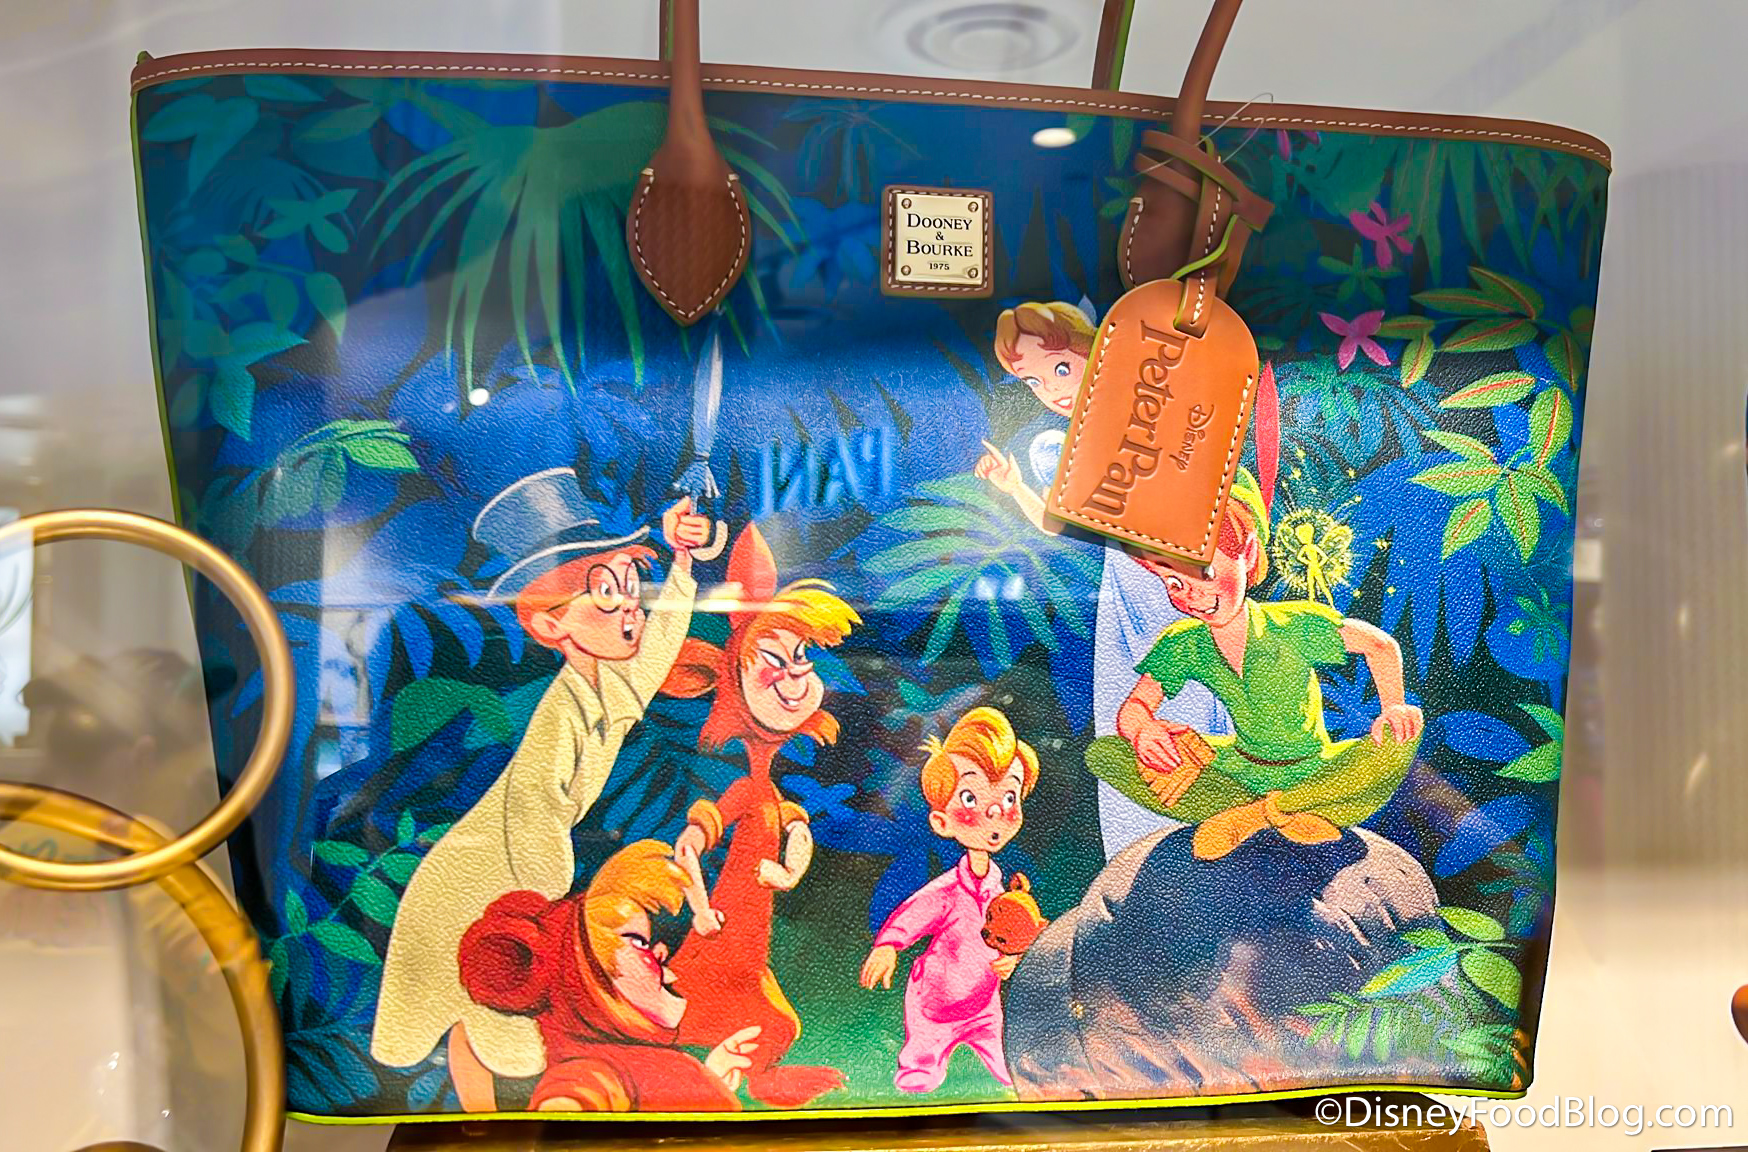 PHOTOS: Disney World Just Dropped A New 50th Anniversary Dooney & Bourke Bag  — And it's EPIC